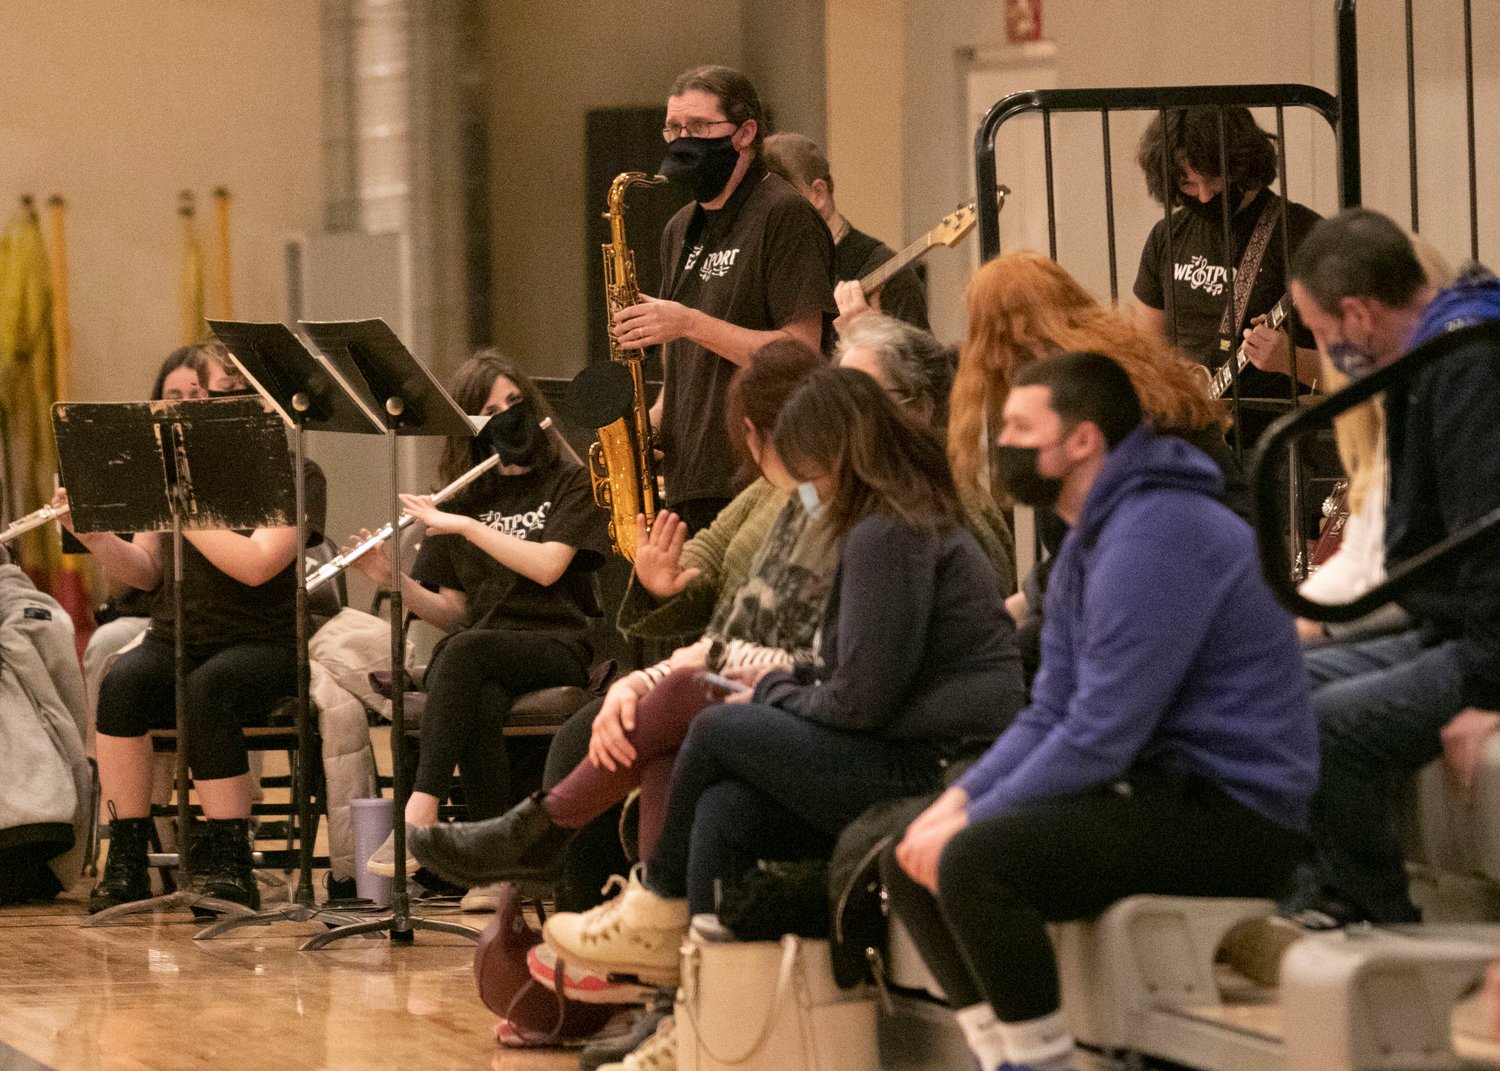 The Westport High School pep band directed by Chris Nunes (sax) was back in the house playing the “Cupid Shuffle,” “Crazy Train” and more. For now the band will play in the south corner of the gym.